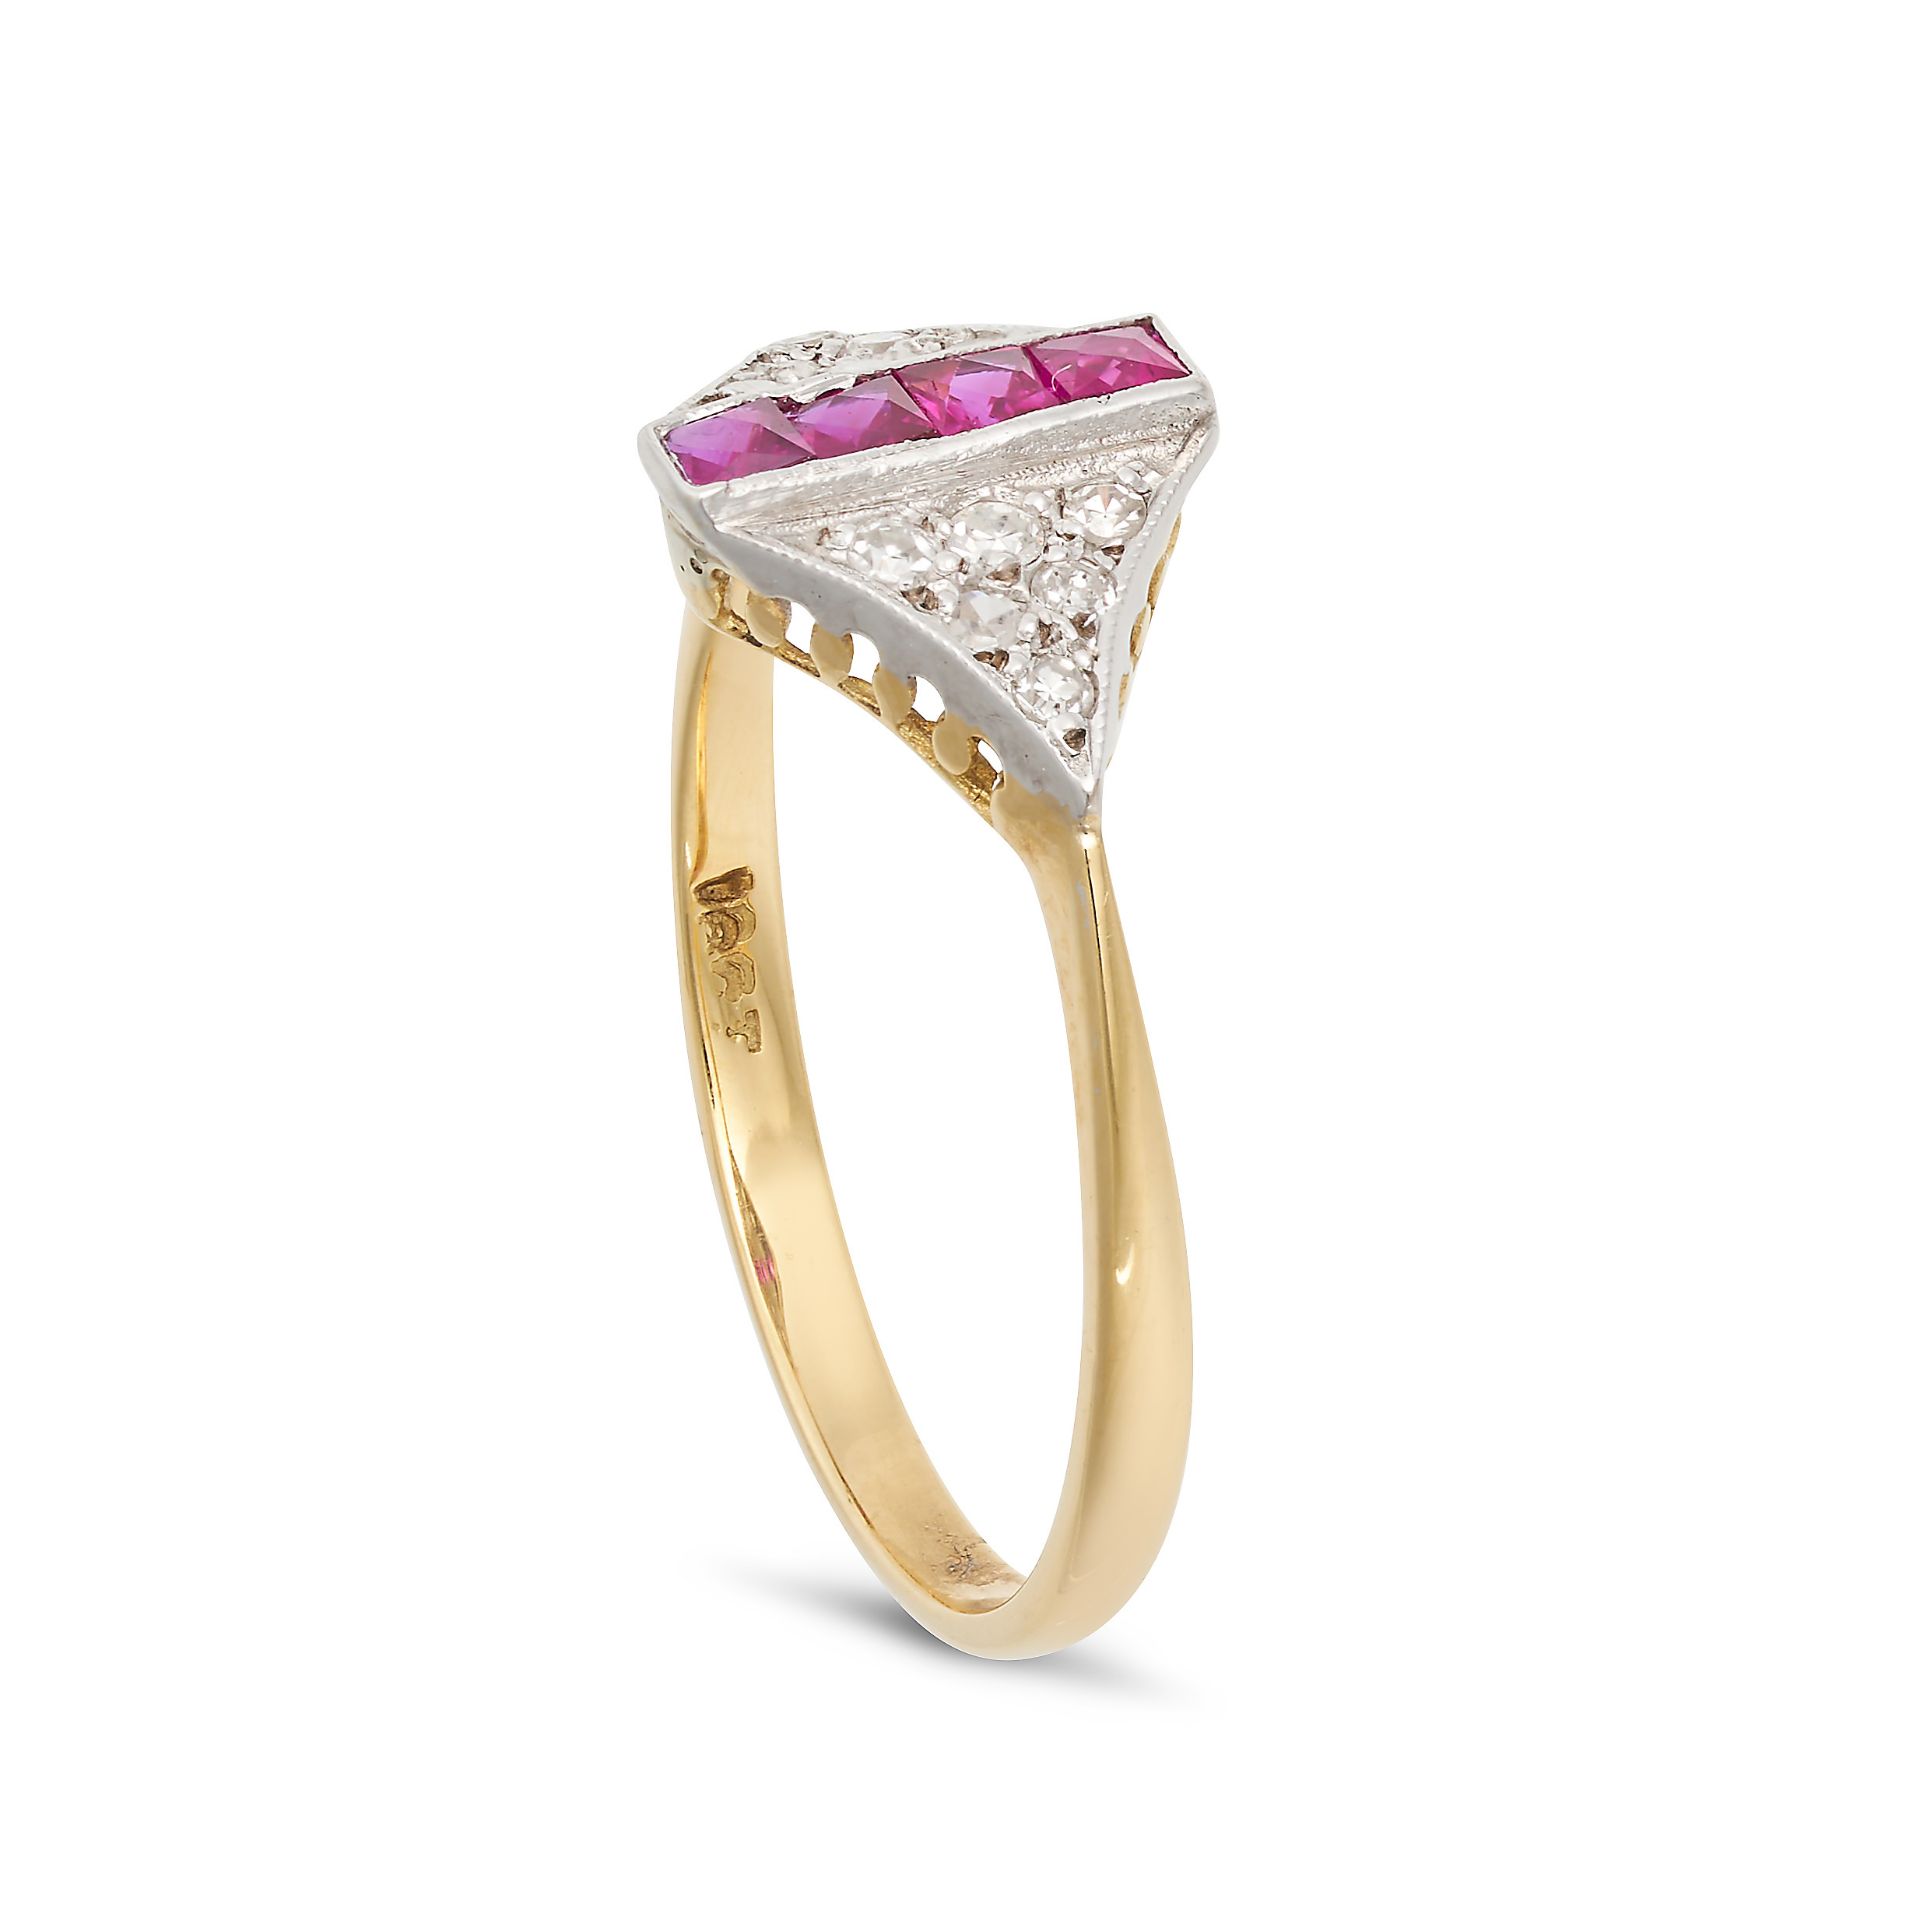 A RUBY AND DIAMOND DRESS RING in 18ct white and yellow gold, set with a row of French cut rubies ... - Image 2 of 2